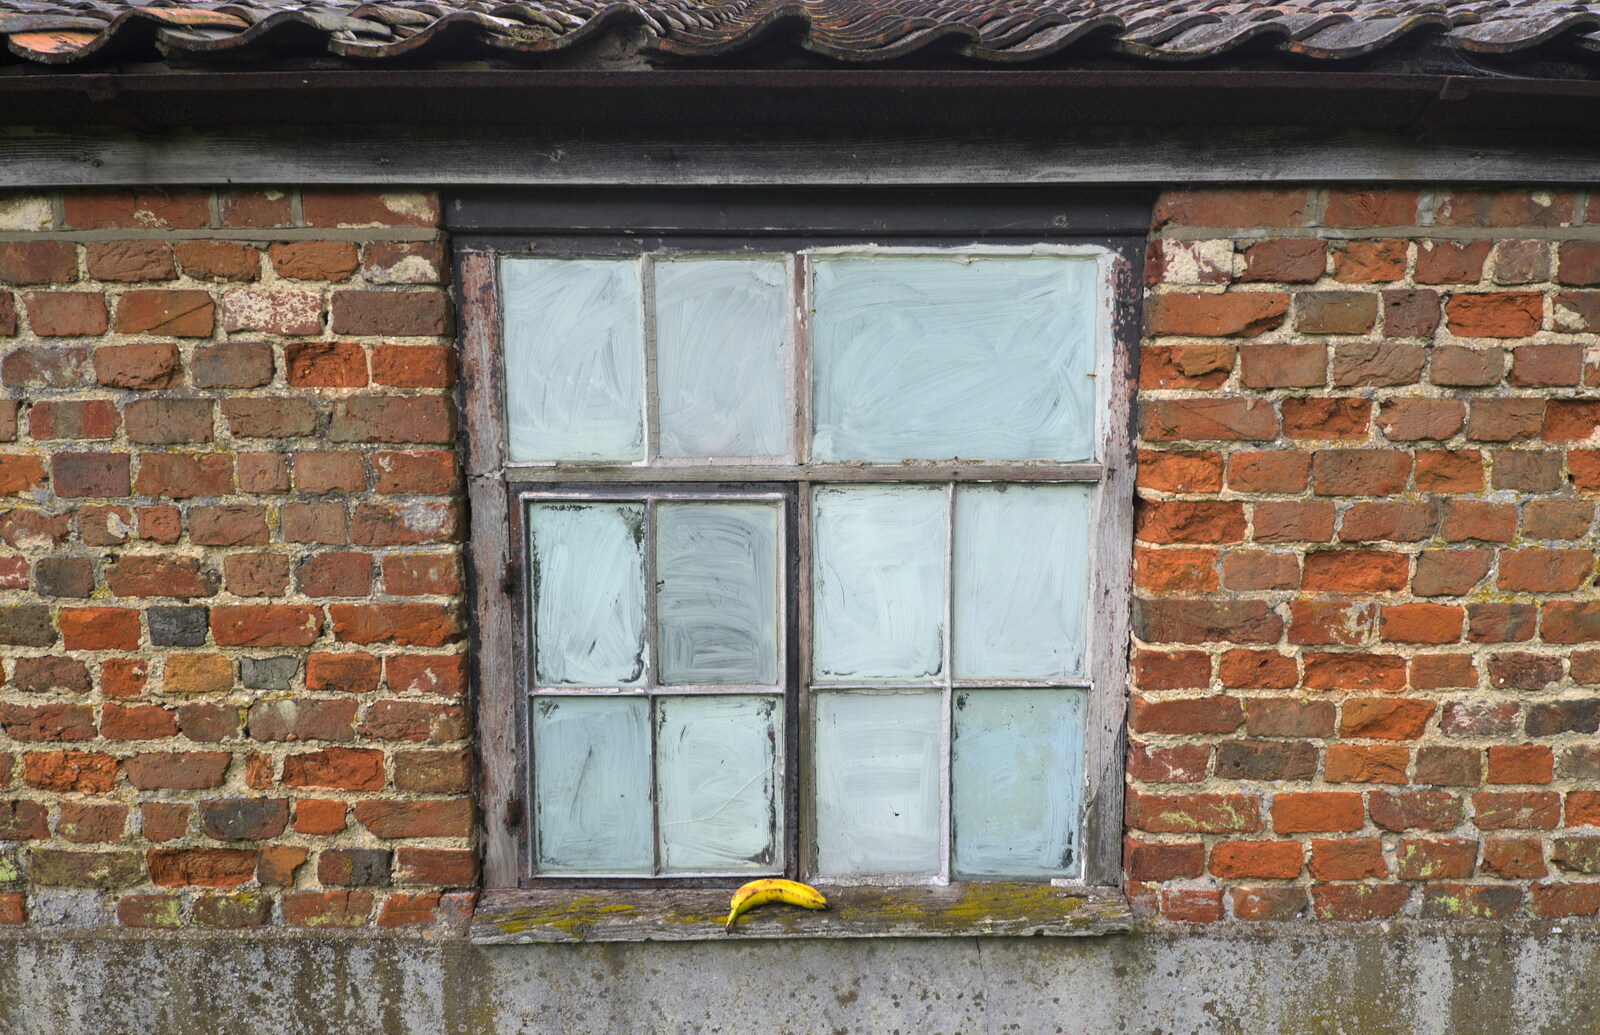 An out-house window with an abandoned banana from The RSPB Charity Bike Ride, Little Glemham, Suffolk - 5th August 2012